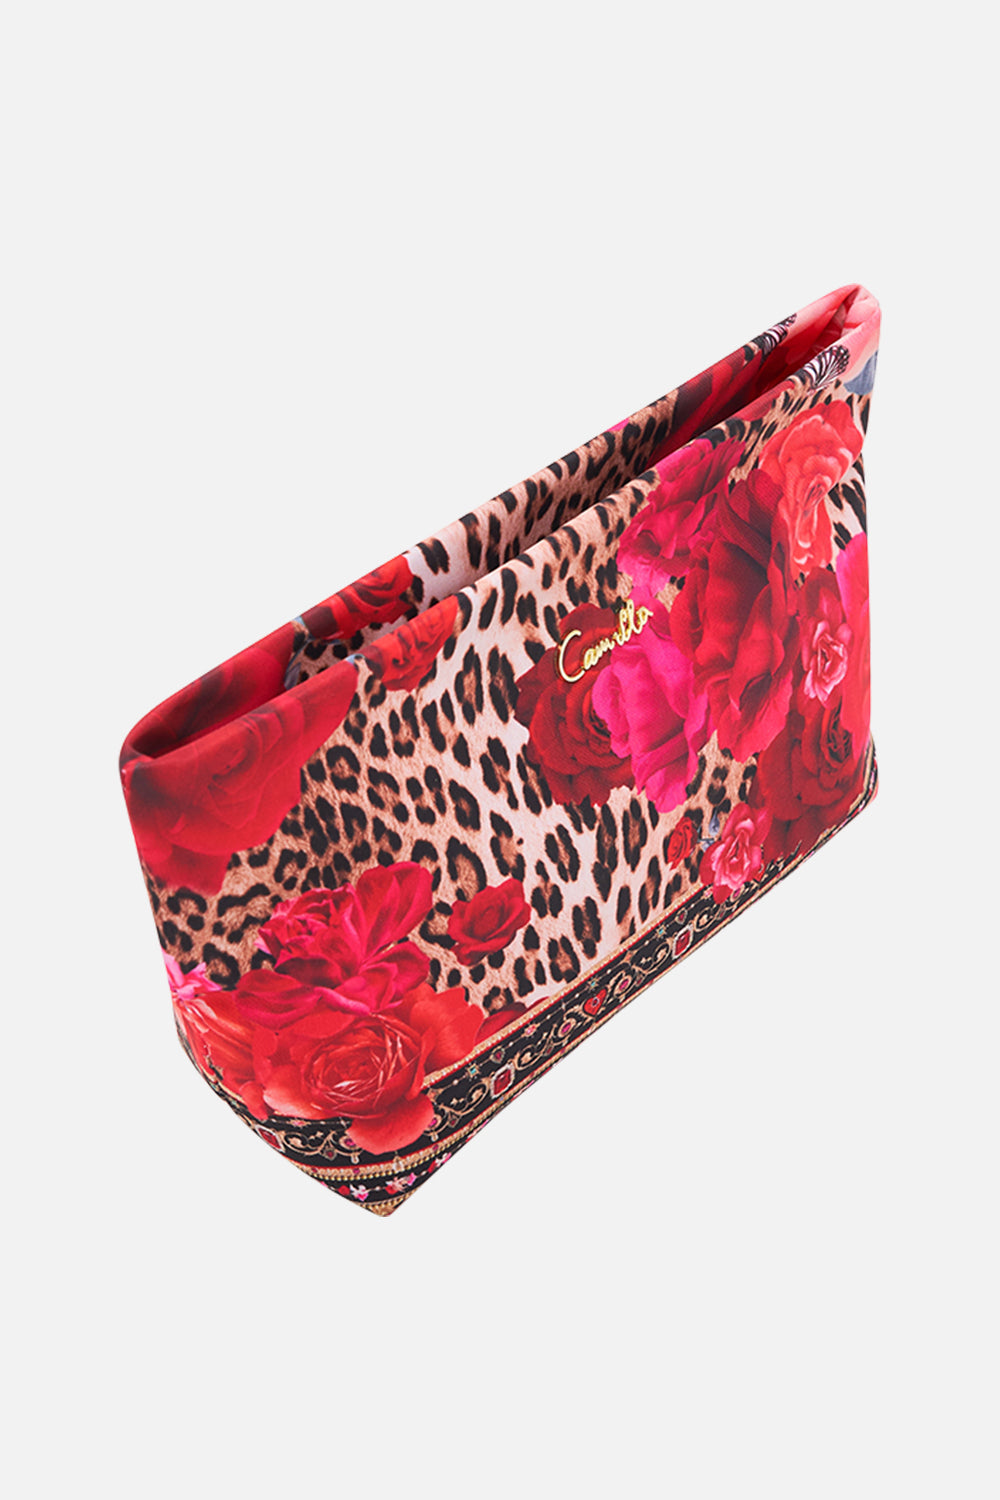 Product view of CAMILLA small make up bag in Heart like A Wildflower print